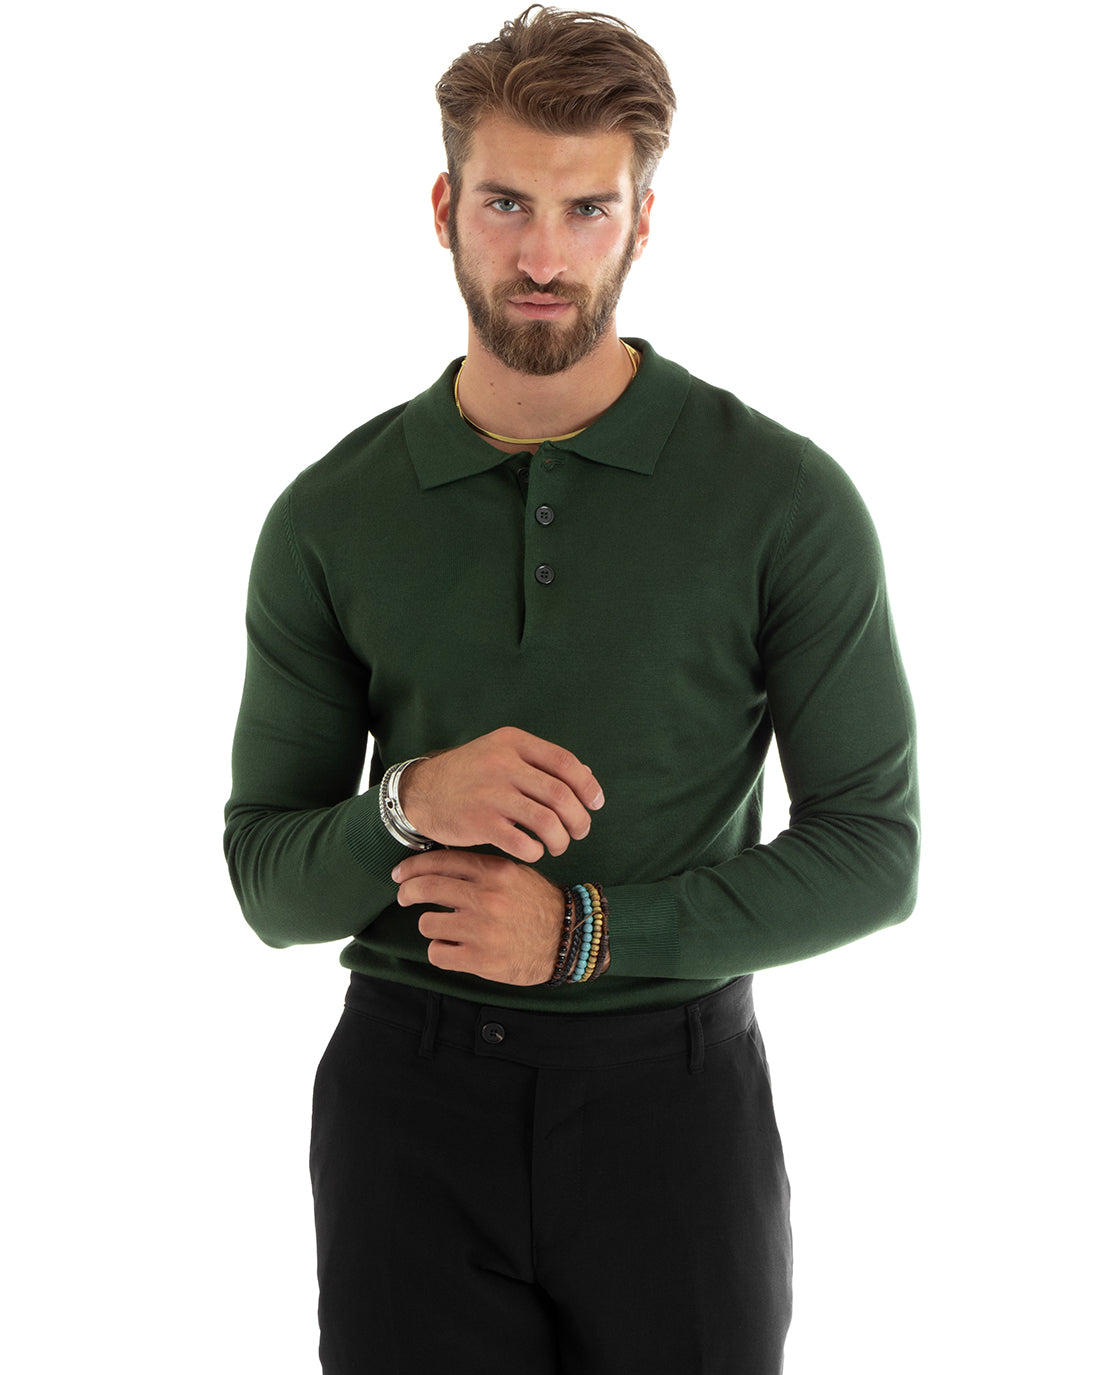 Men's Casual Crewneck Sweater Solid Color Long Sleeve Olive Green GIOSAL M2495A